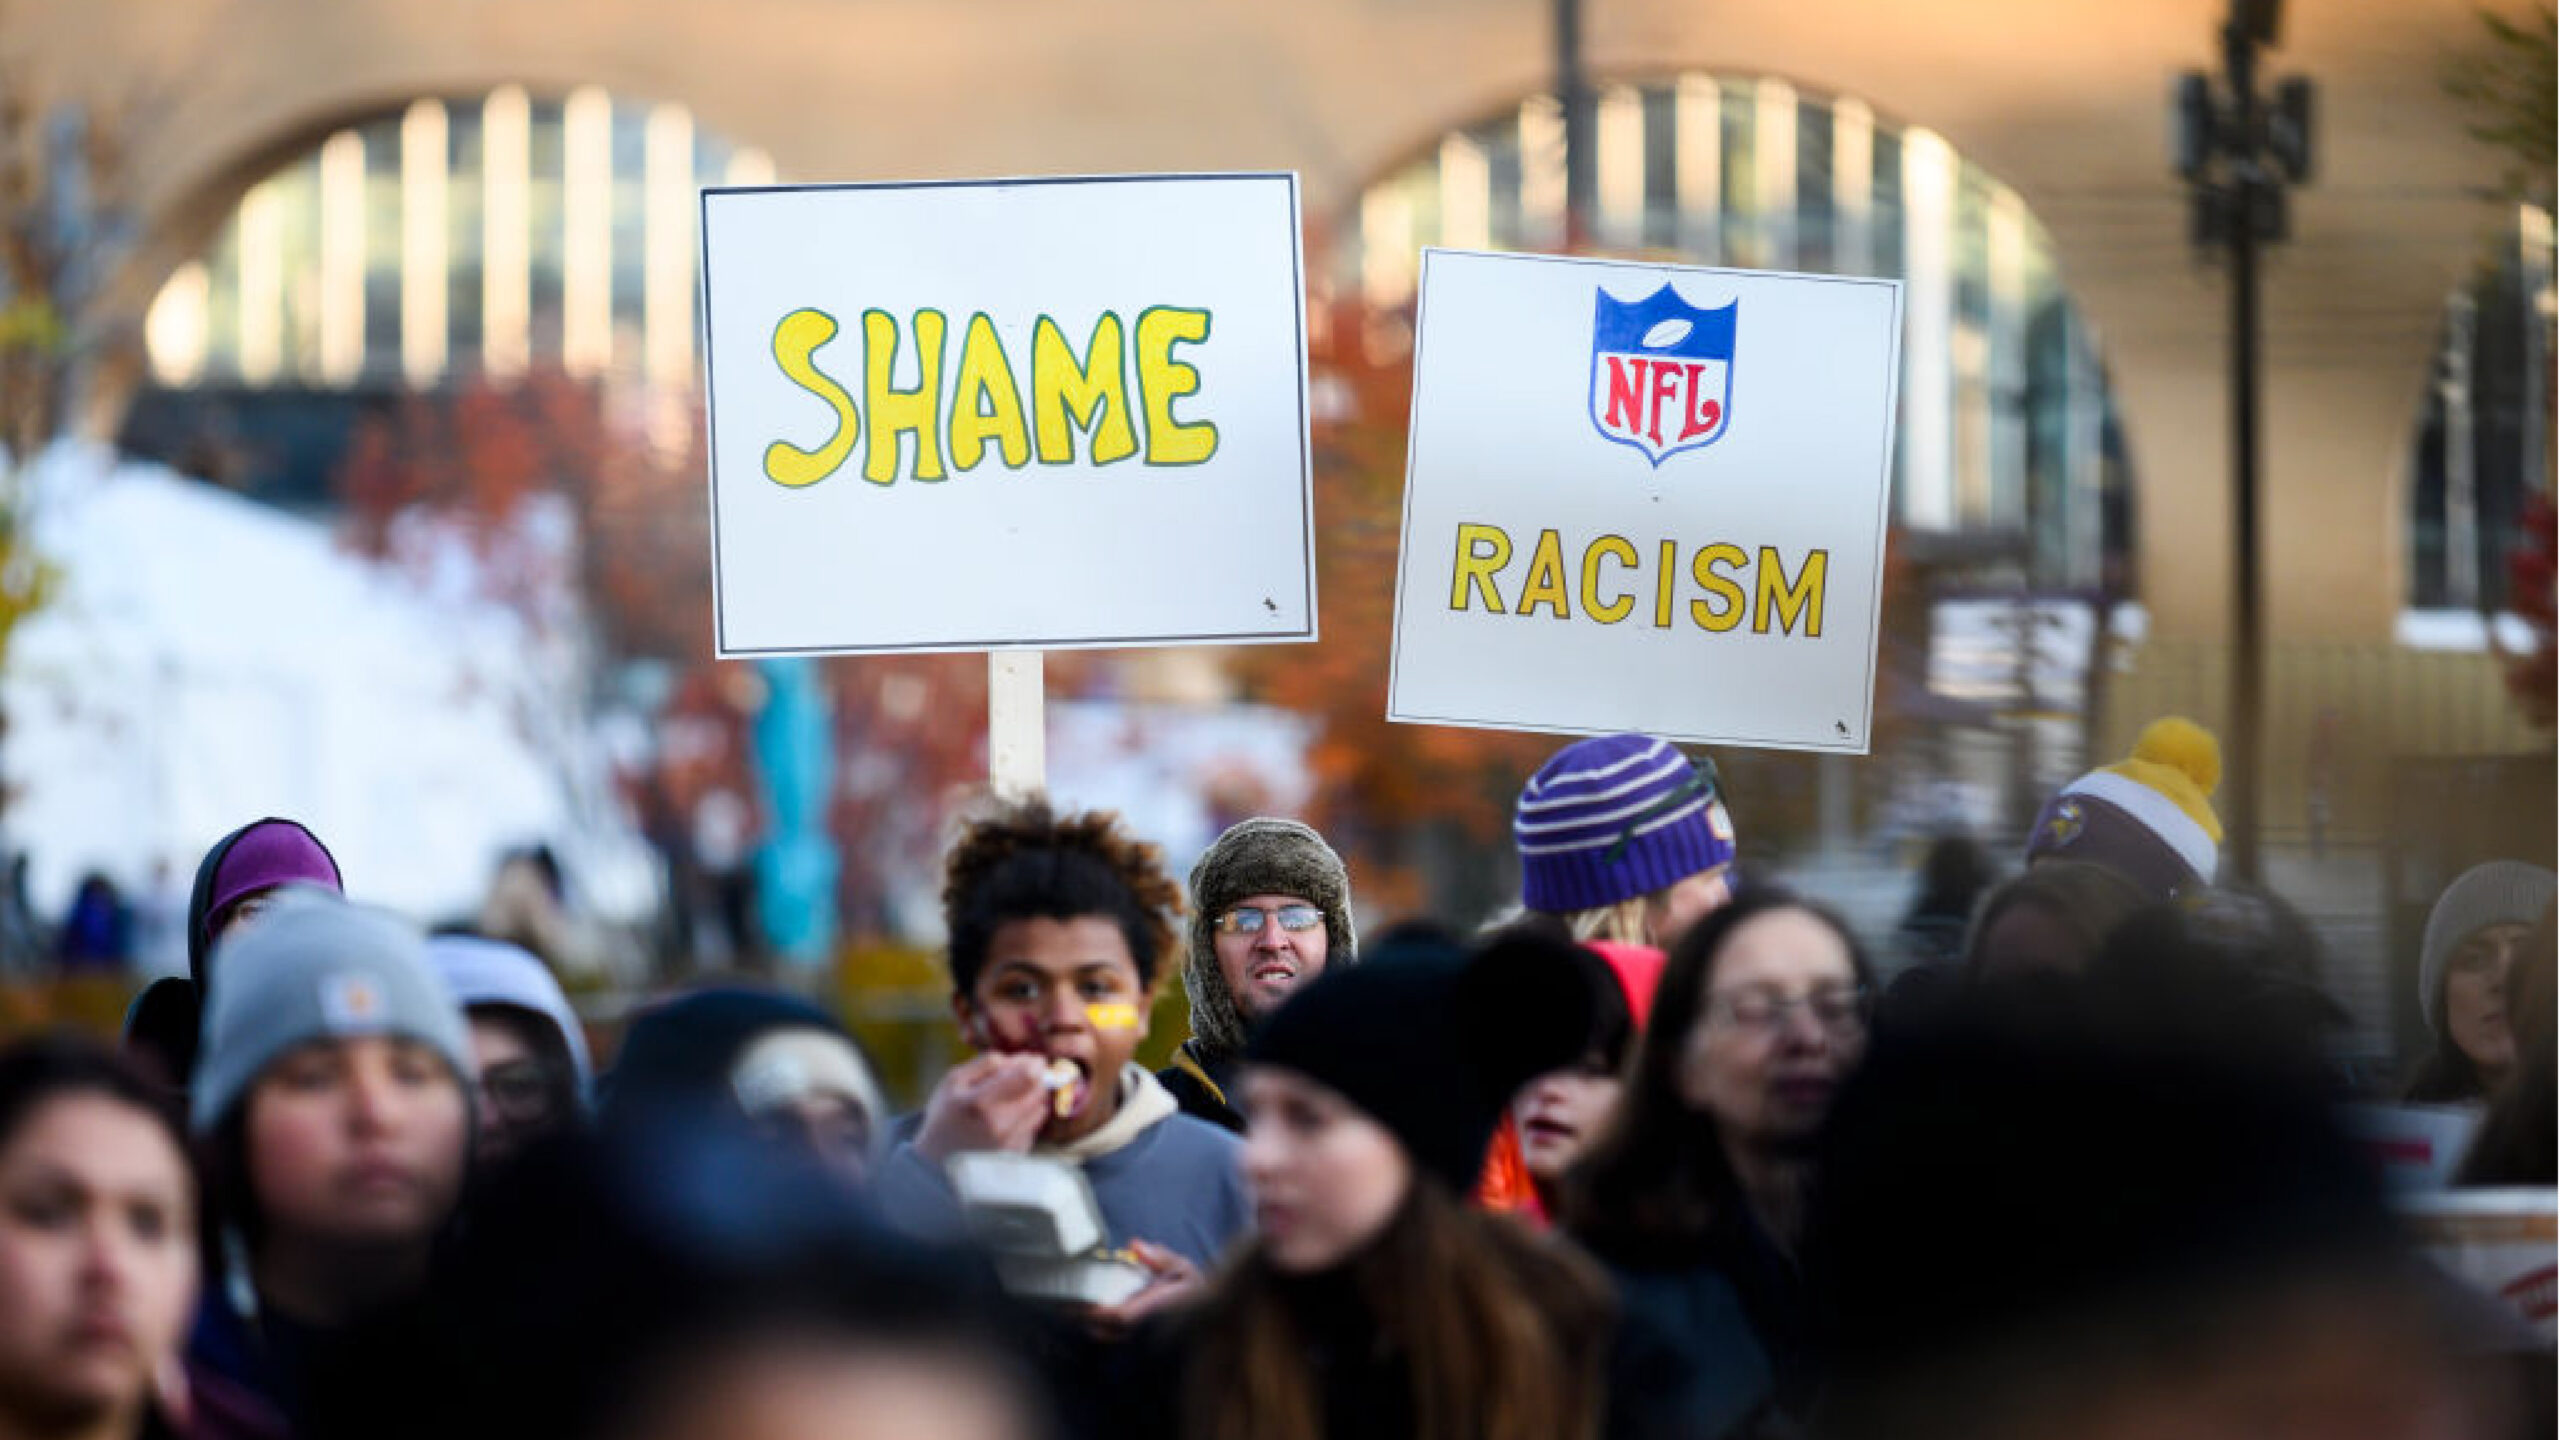 MINNEAPOLIS, MN - OCTOBER 24: Protestors rally outside U.S. Bank Stadium before the game between the Washington Redskins and Minnesota Vikings on October 24, 2019 in Minneapolis, Minnesota. A number of Native American leaders and local politicians spoke about the Washington nickname. (Photo by Stephen Maturen/Getty Images)